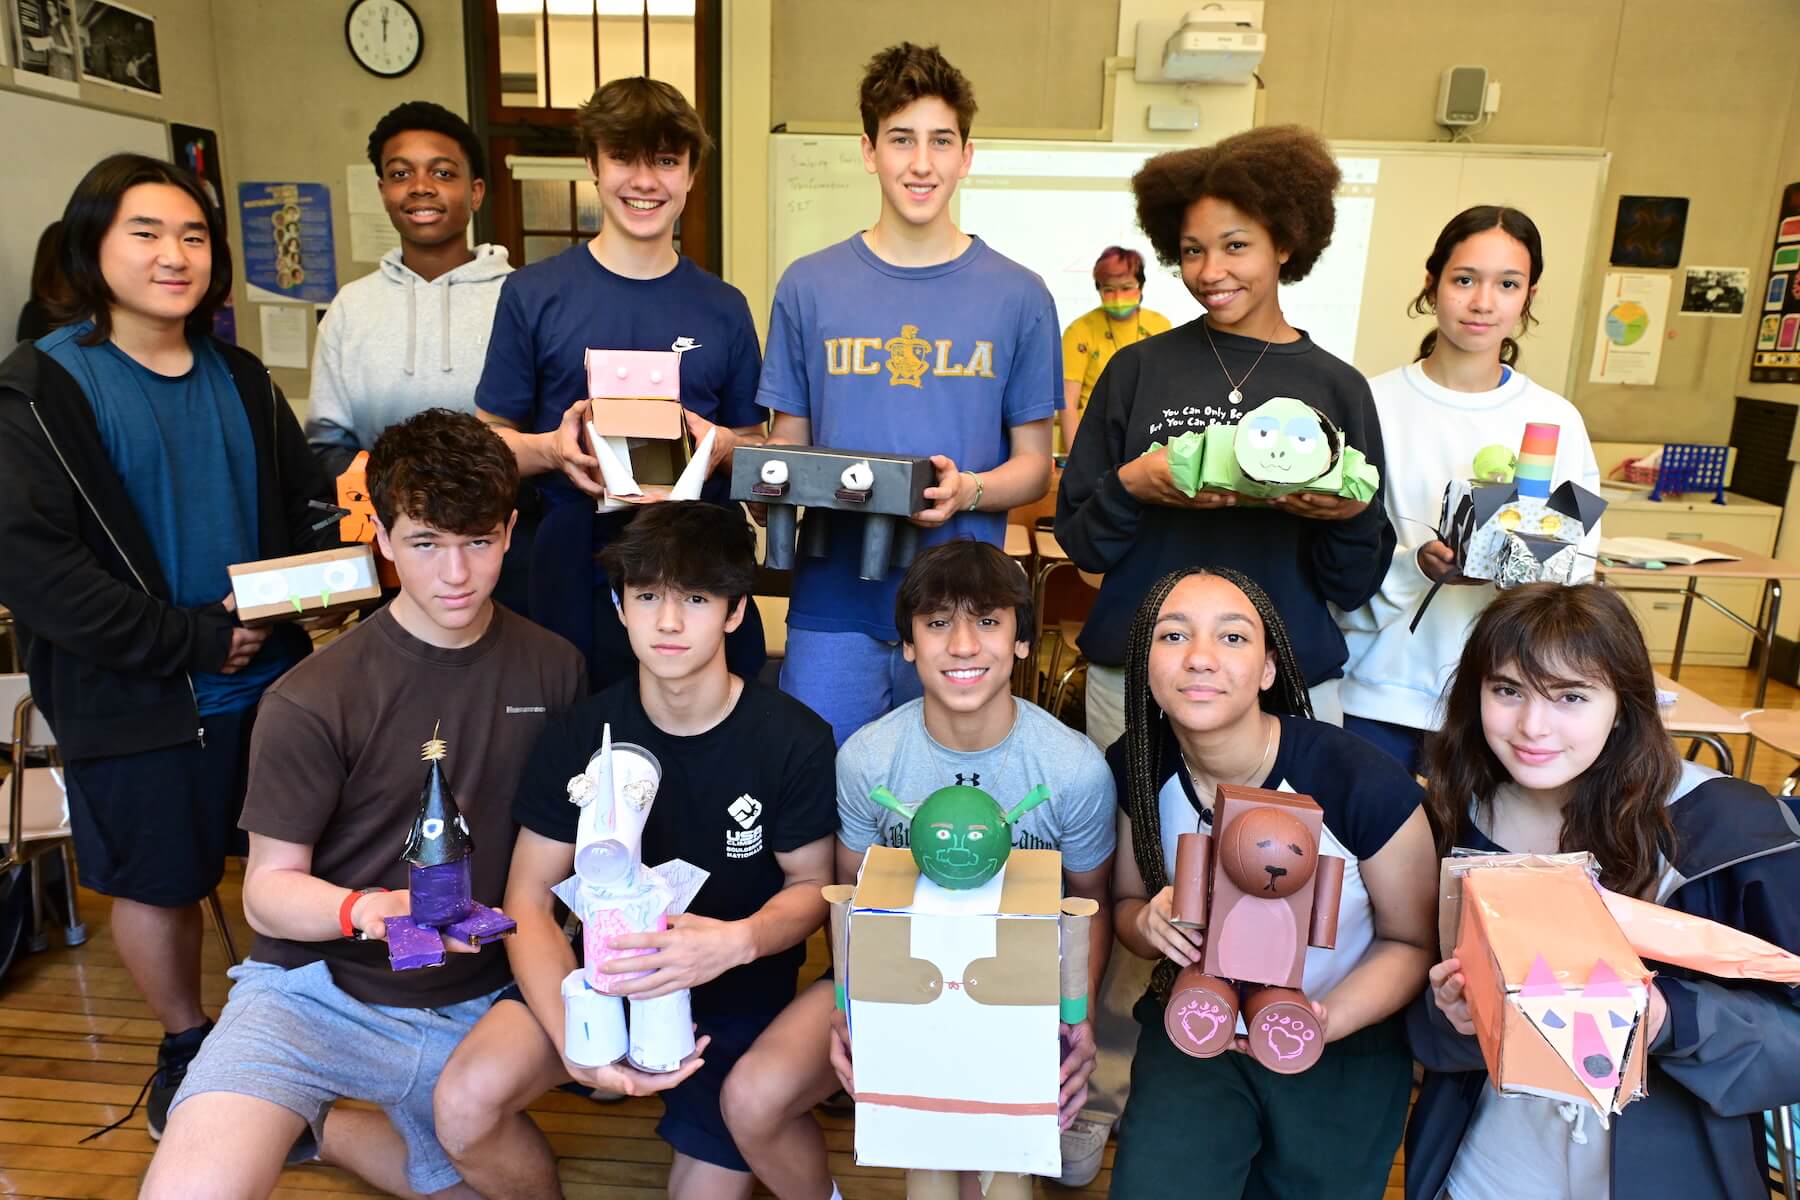 Ethical Culture Fieldston School Upper School students share their geometry sculptures